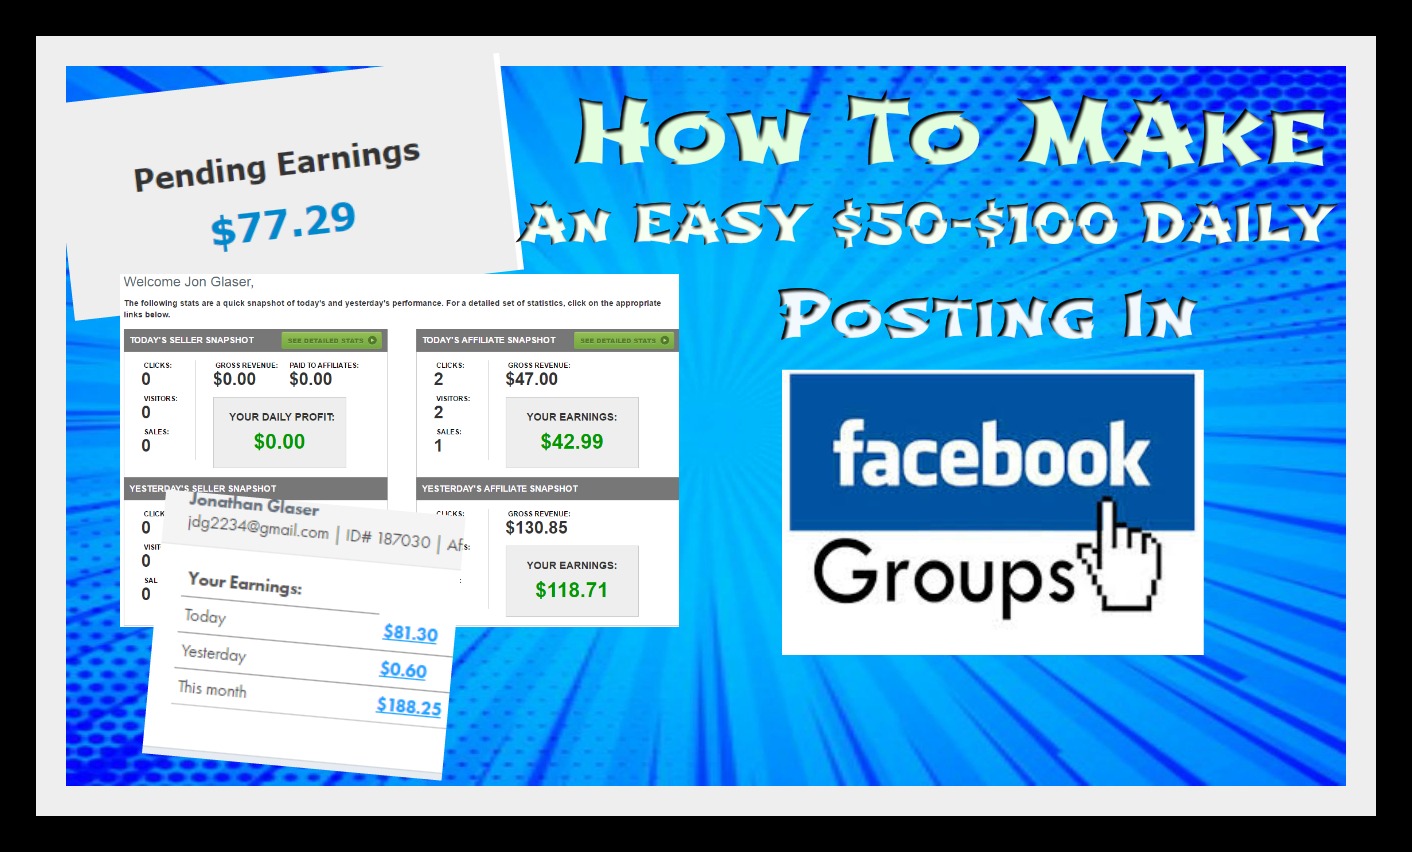 Facebook Groups Secrets: How To Make $50-$100 Daily